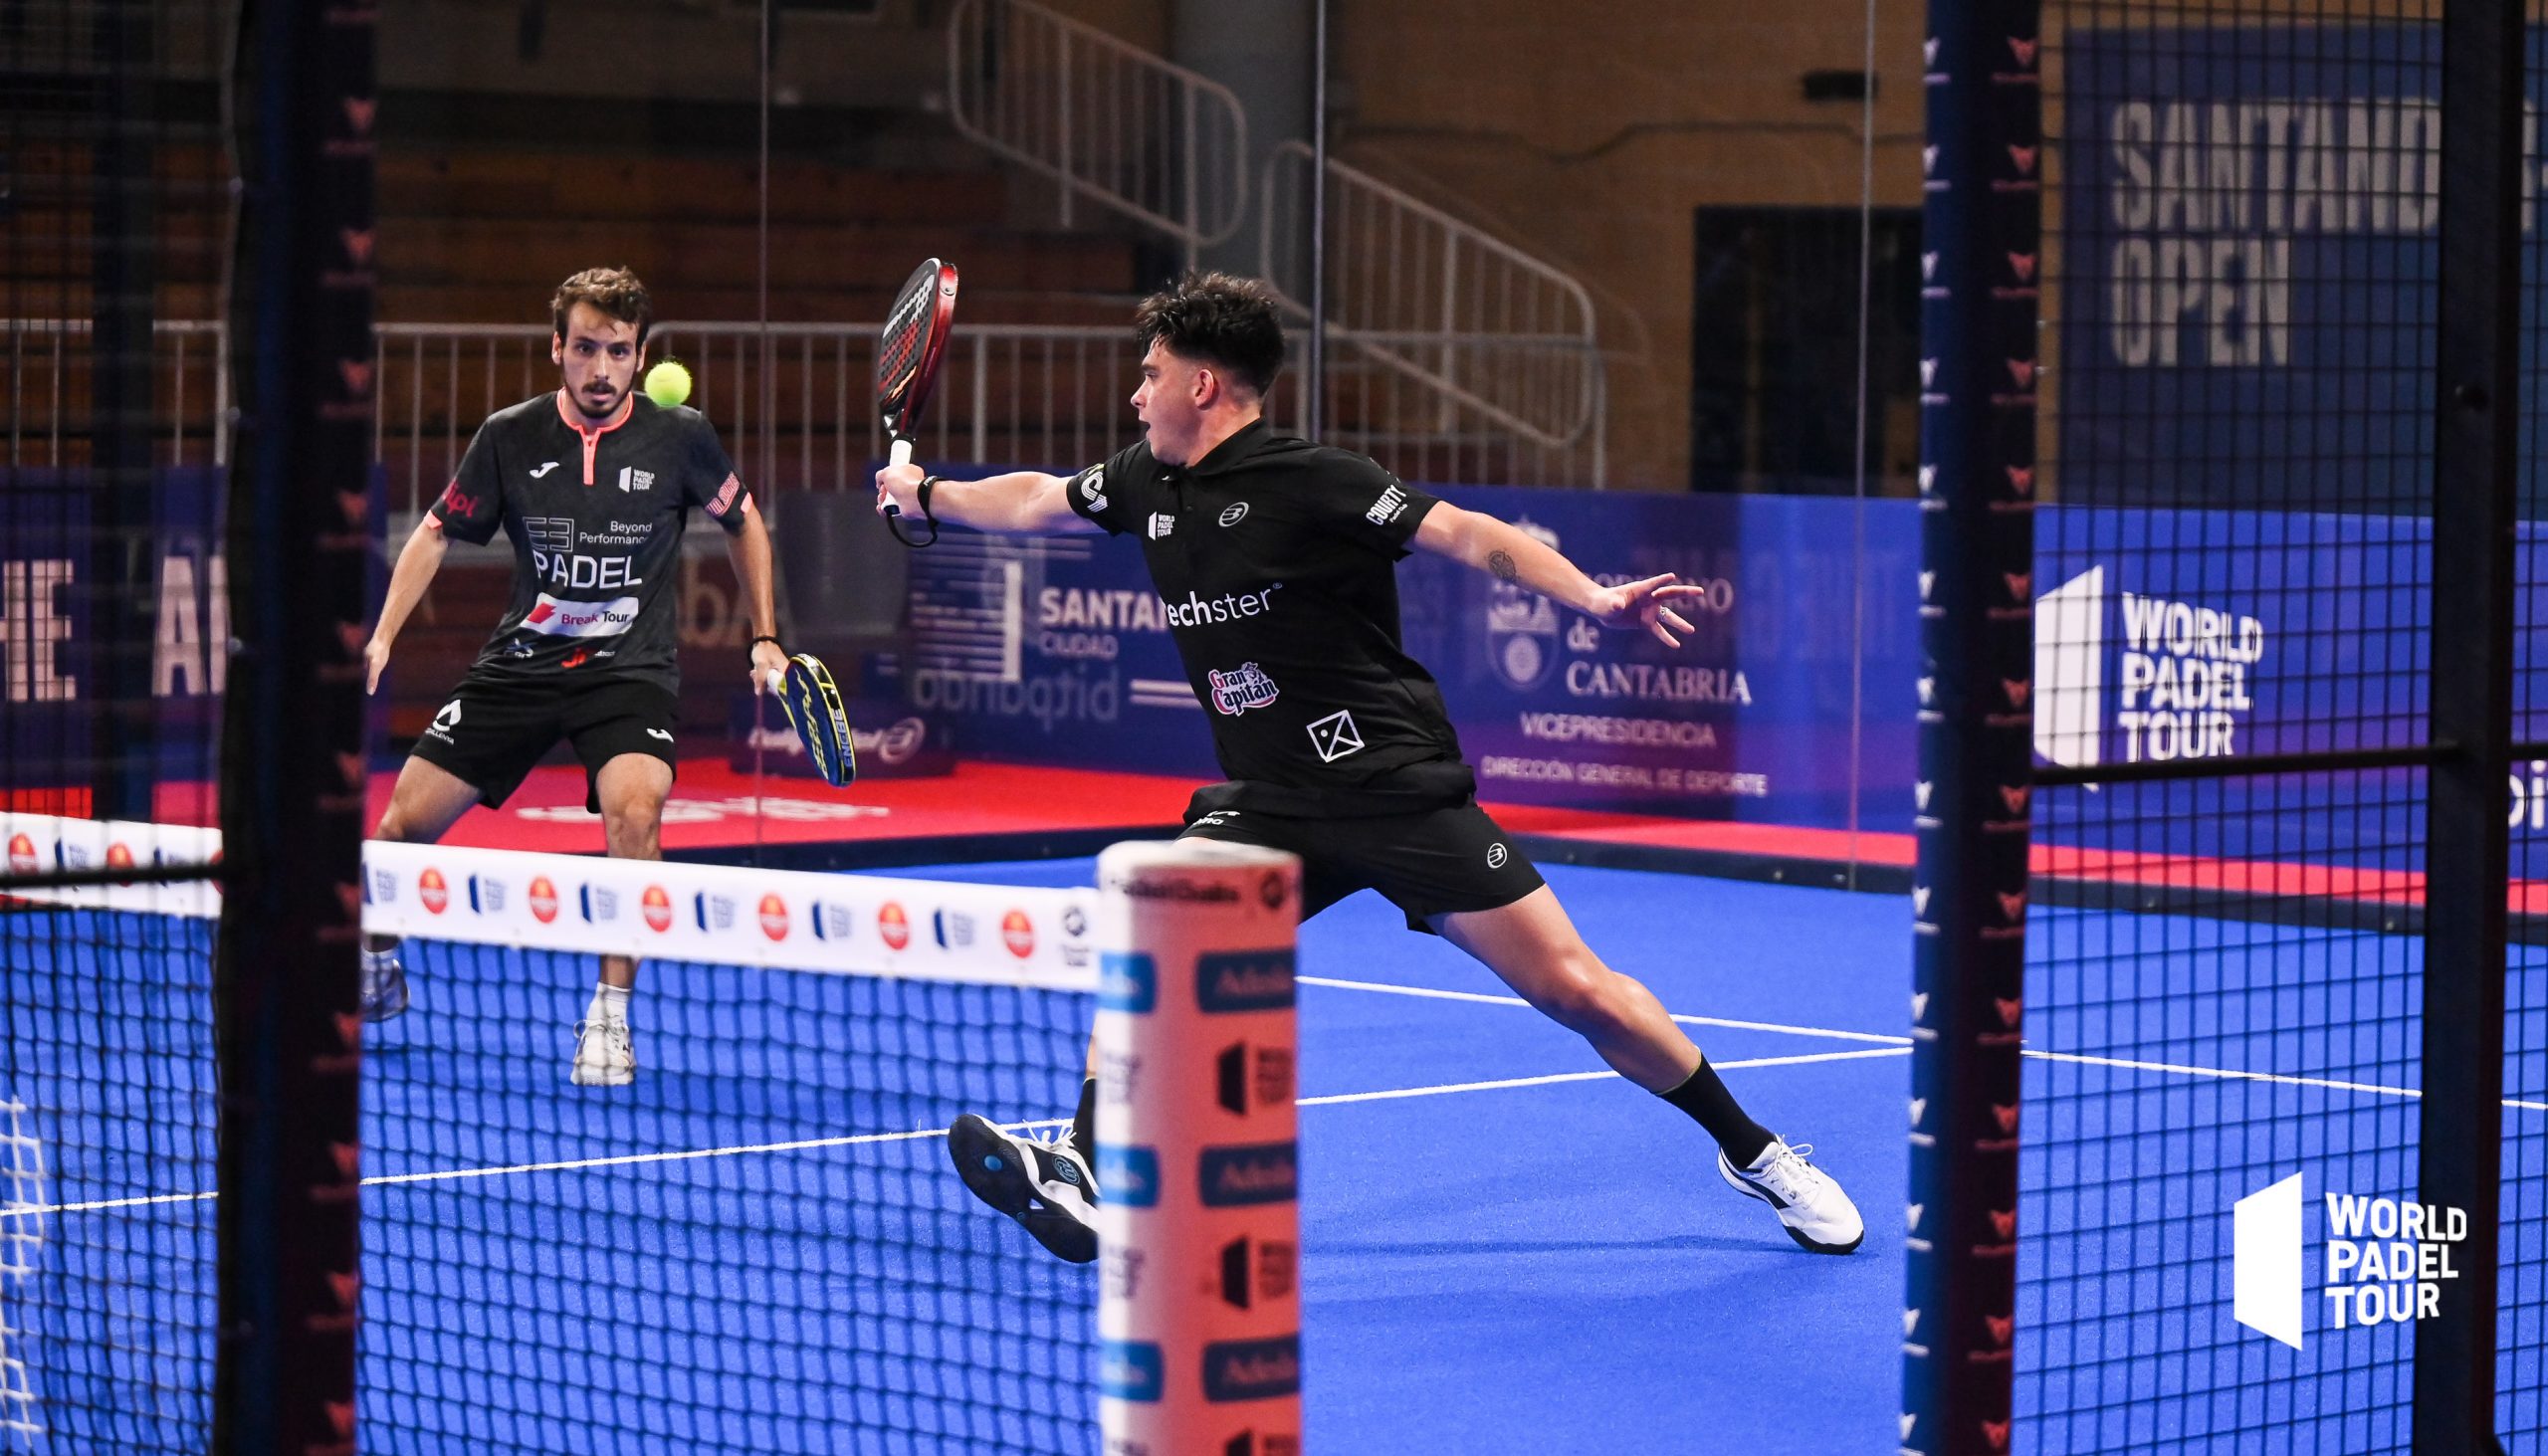 Chingotto and Tello face shock exit in Santander Open round of 16